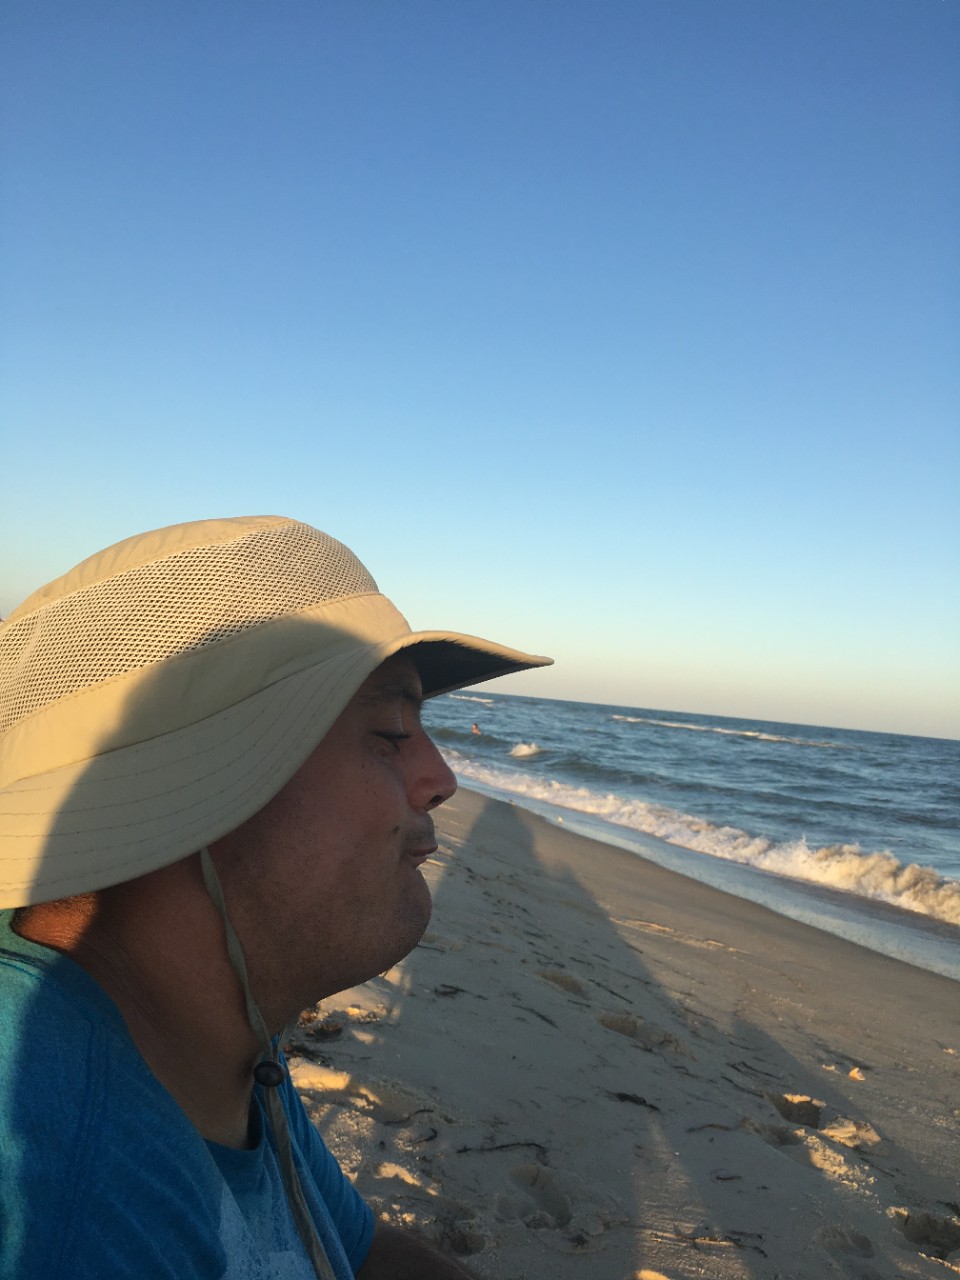 A close-up photo of a man with Down syndrome wearing a fisherman’s hat. He is at the beach, near the edge of the water, and the photo shows him on a sunny, windy day with the shadow of the photographer on the sand behind him.